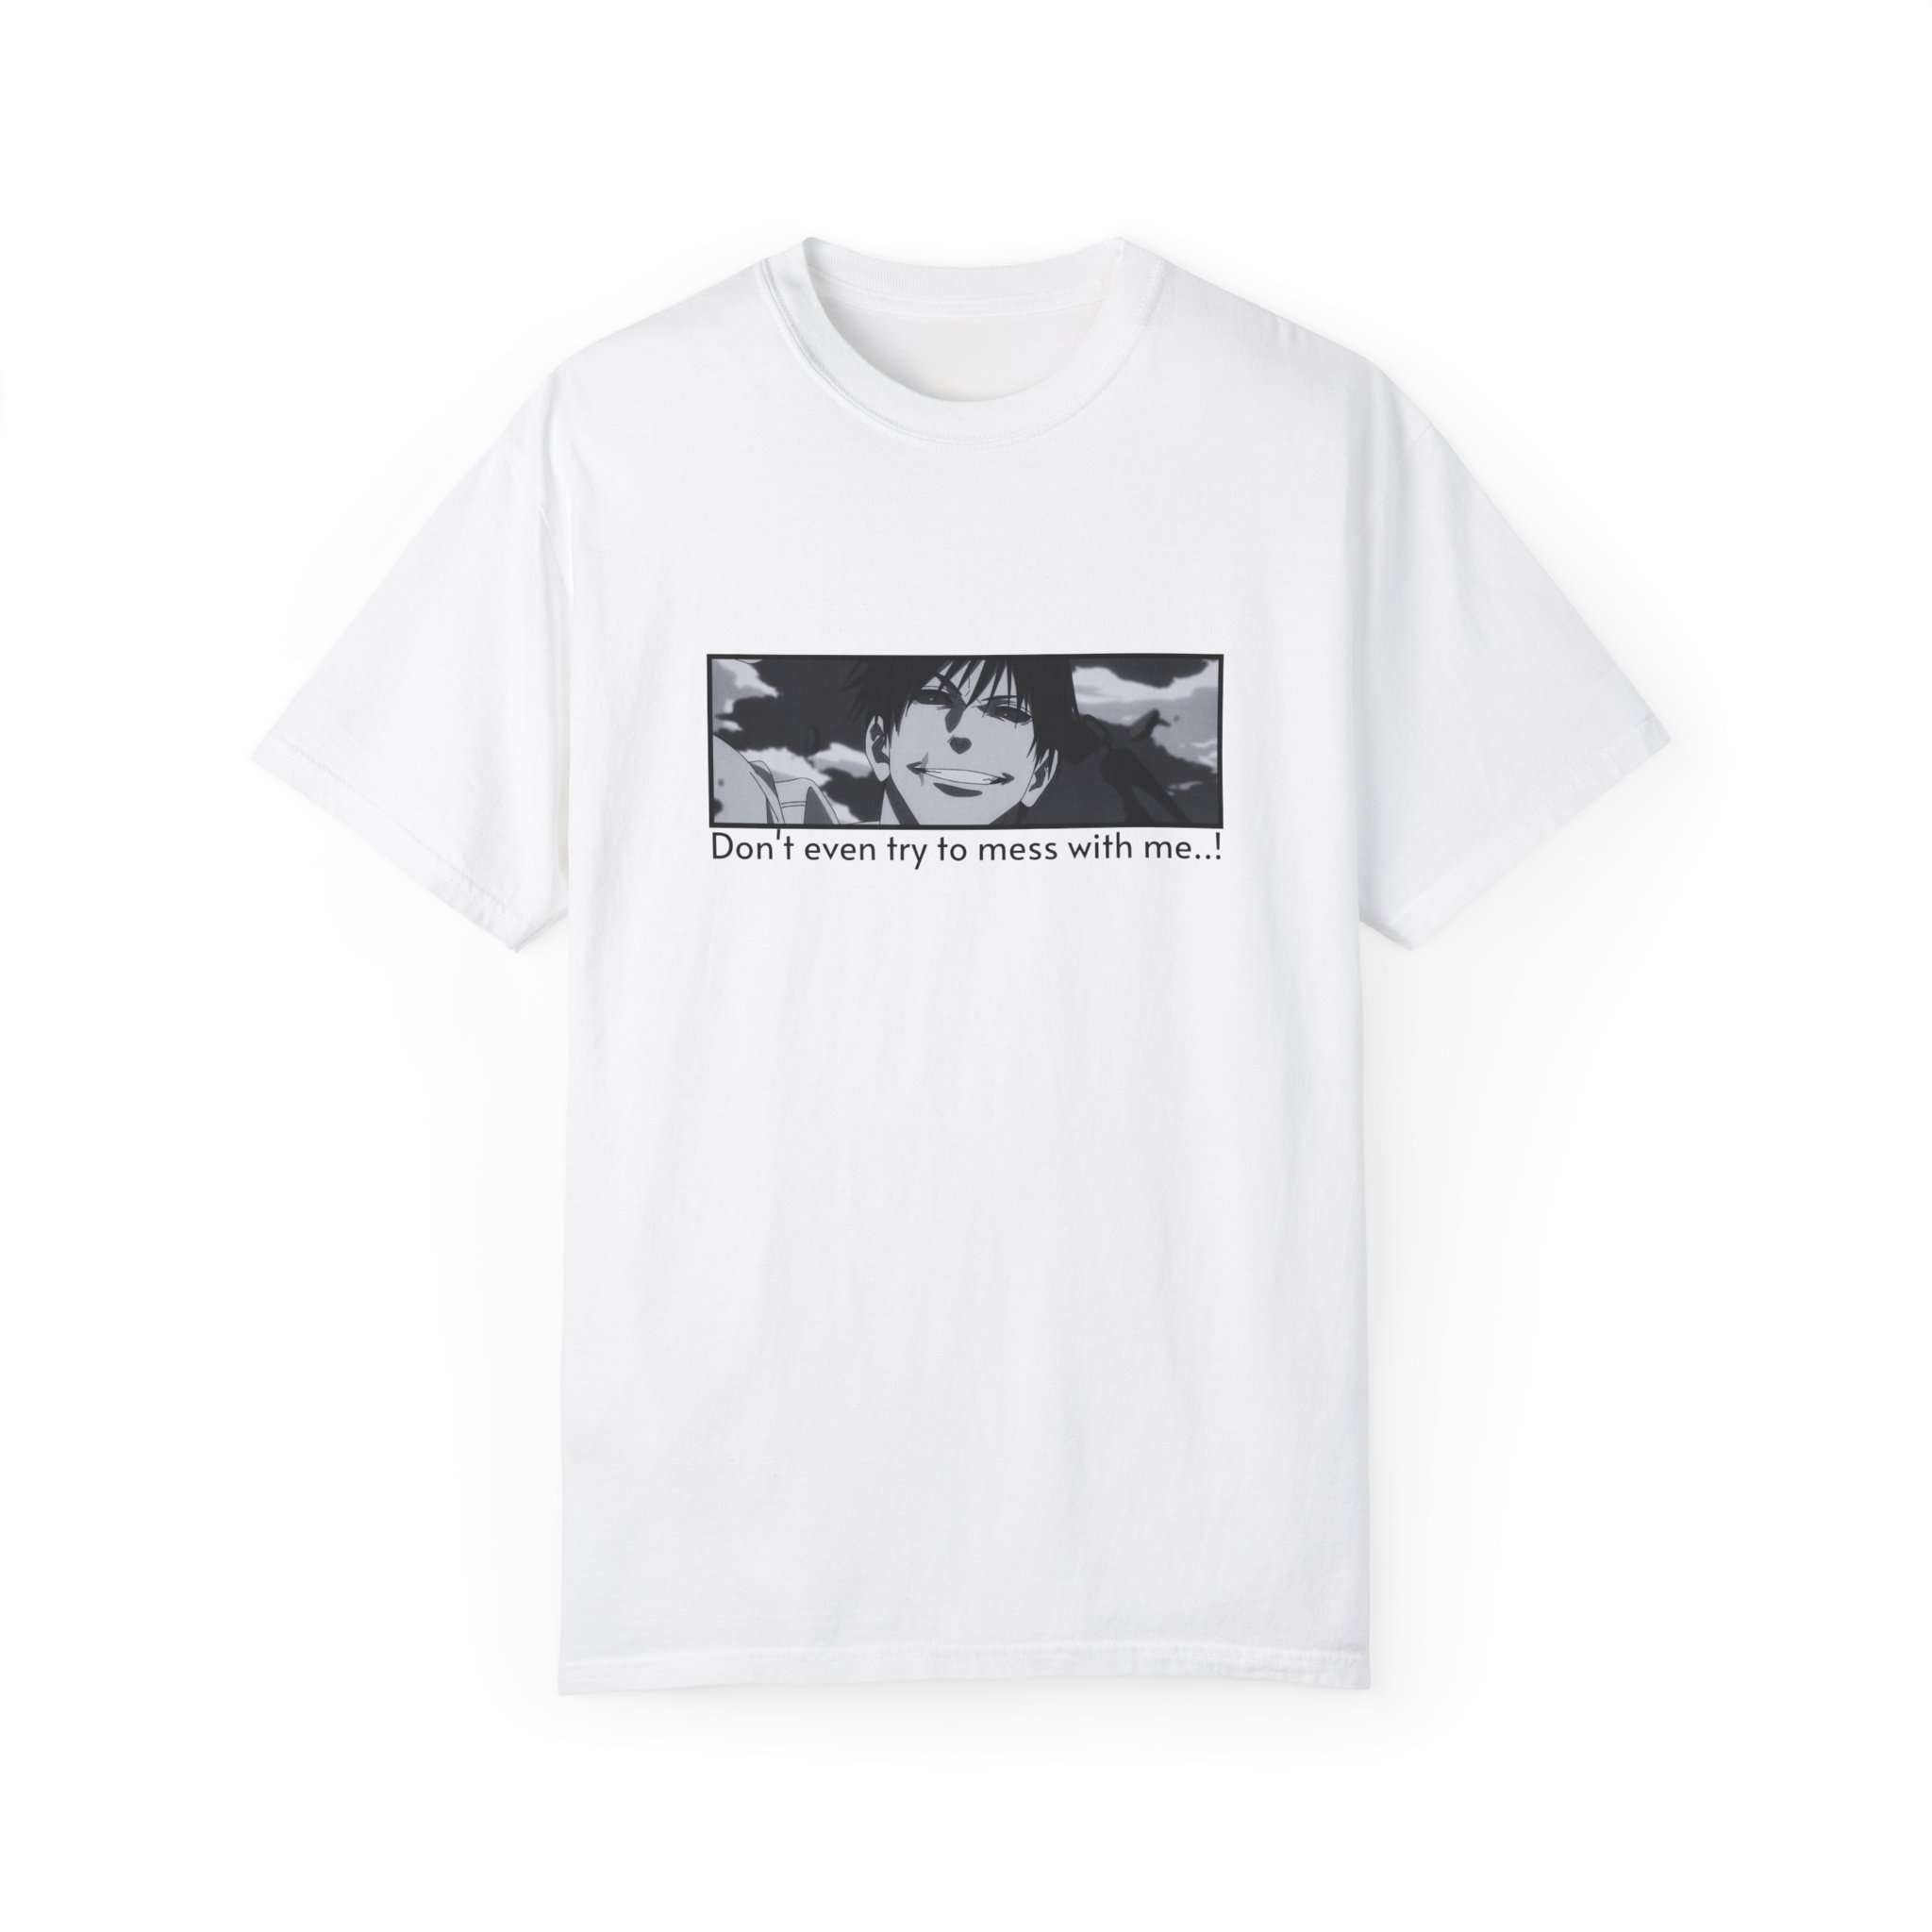 Toji Fushiguro Character Unisex Garment-Dyed T-shirt with 'Don't even try to mess with me.' Quote